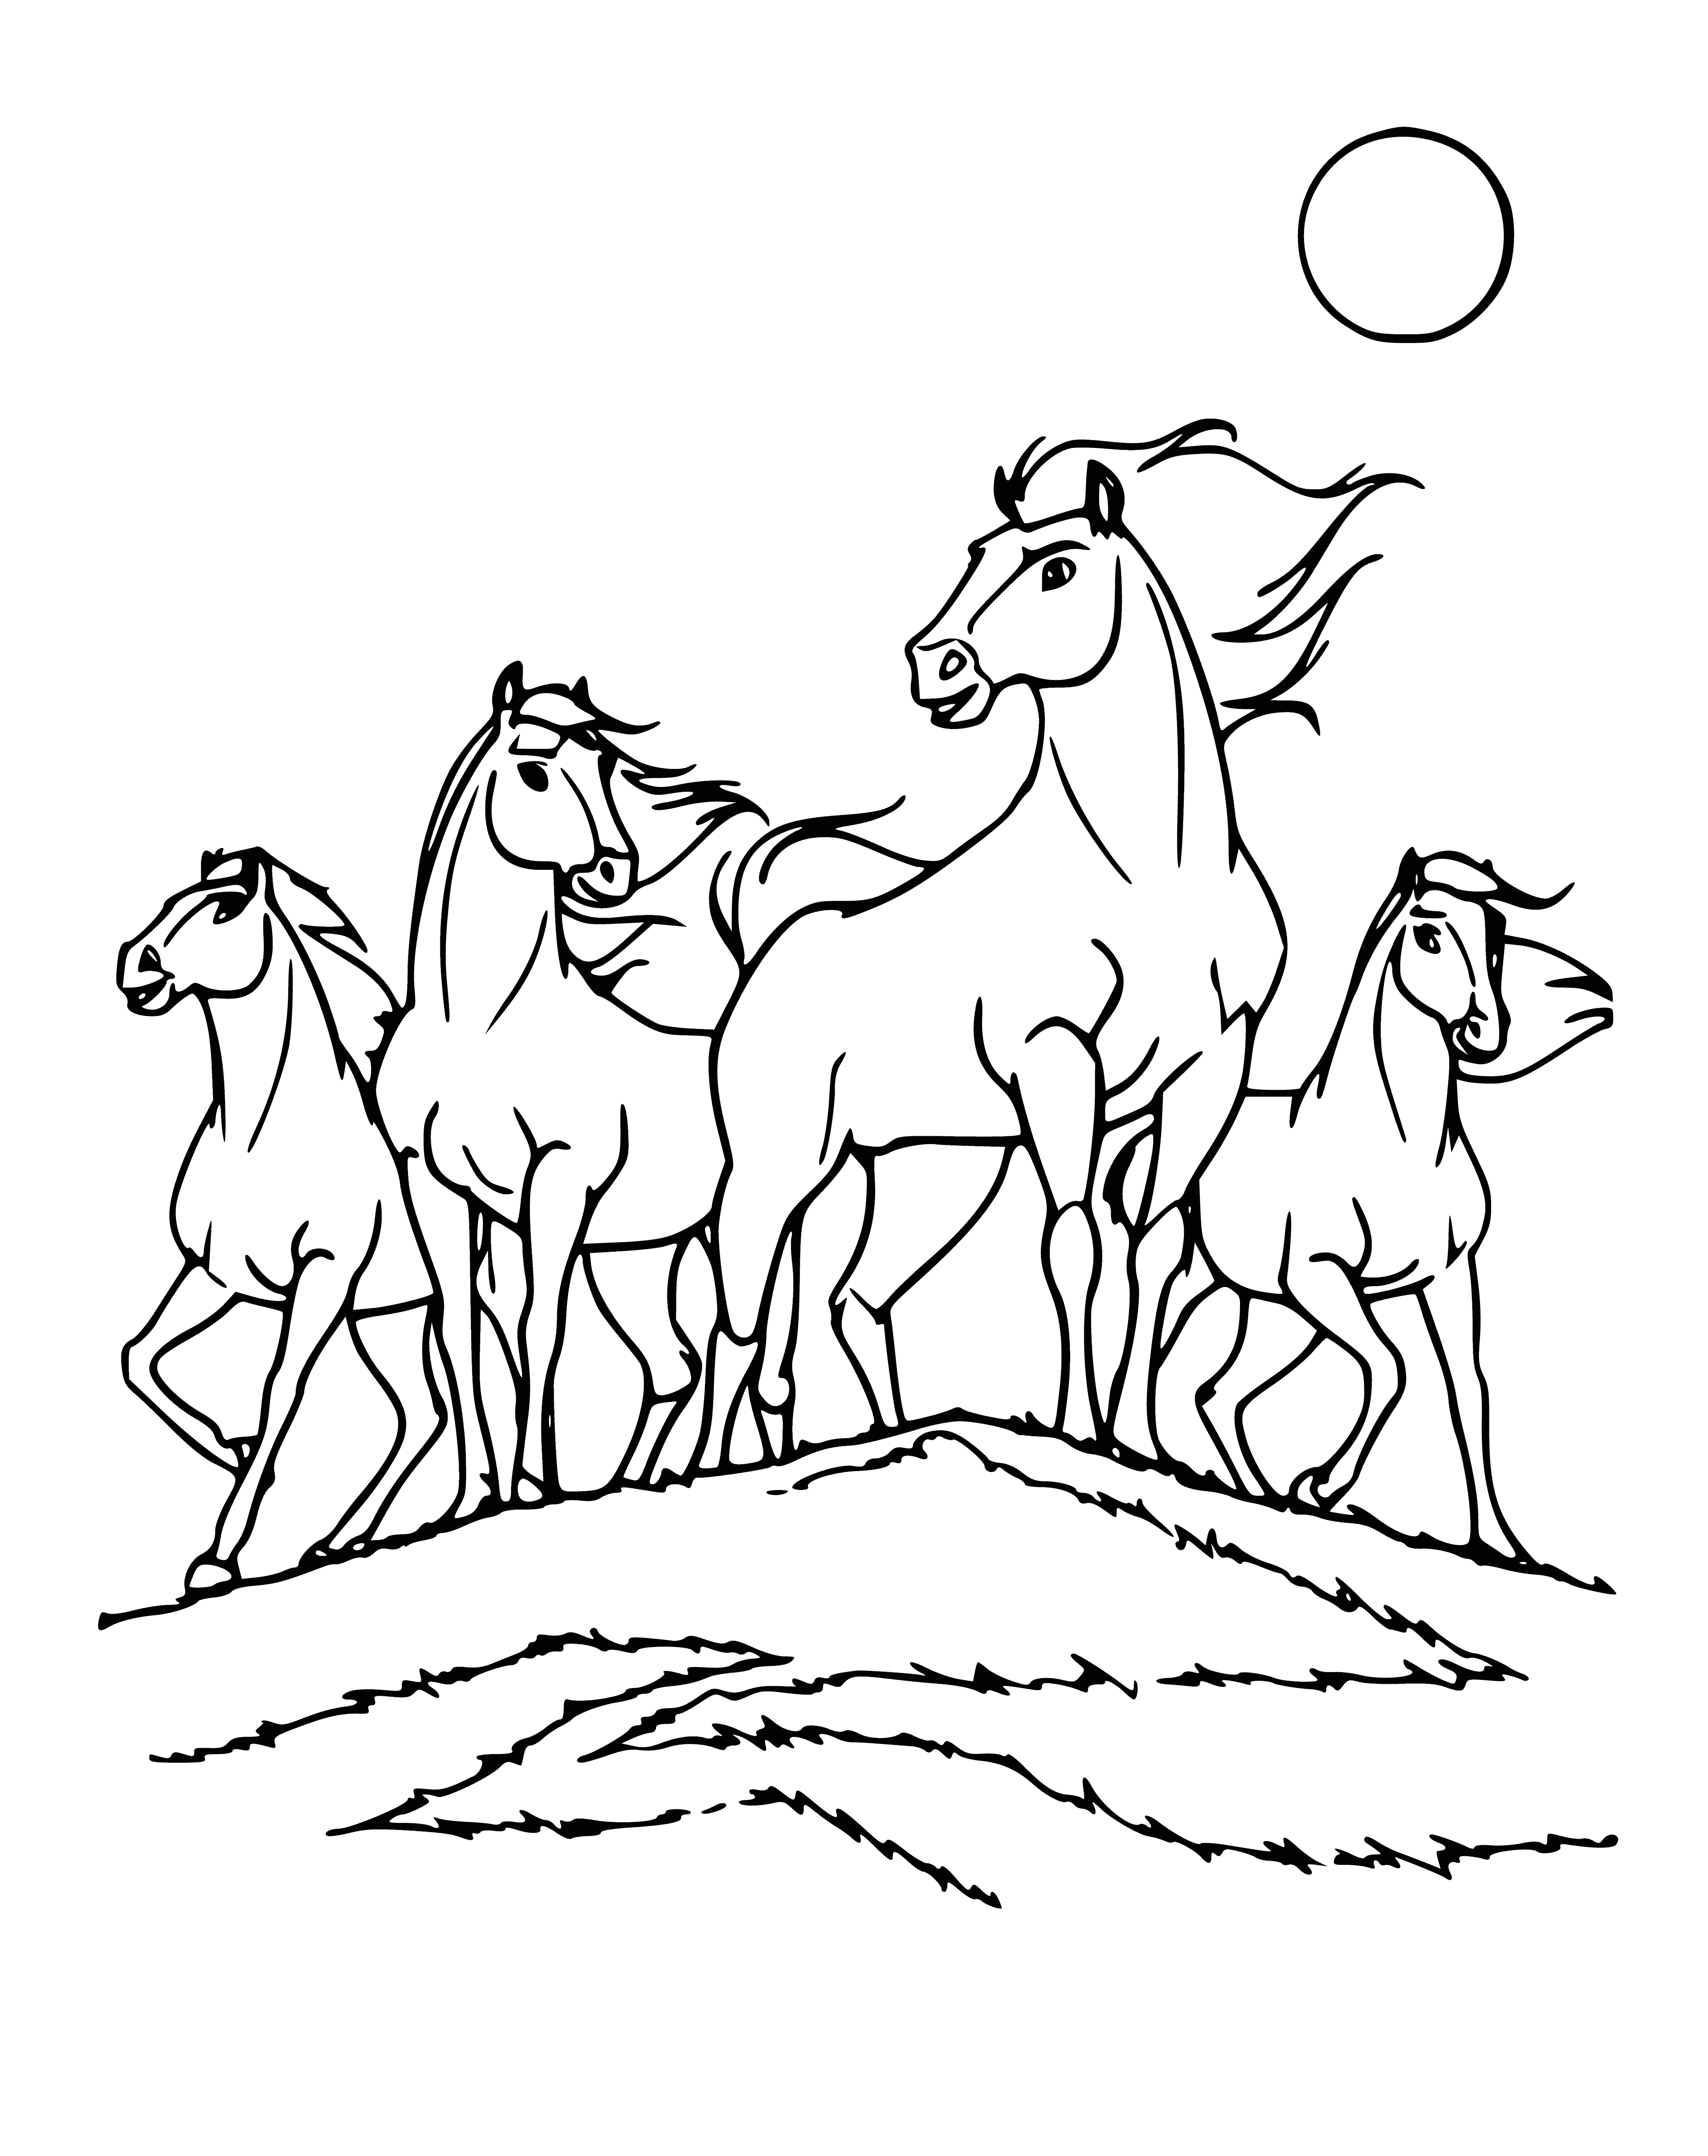 coloring page: A large horse with a dark brown coat stands amongst a group of smaller, multi-colored horses, all with wings. The bigger horse has its head held high and its wings spread, while the smaller horses stare up at it.